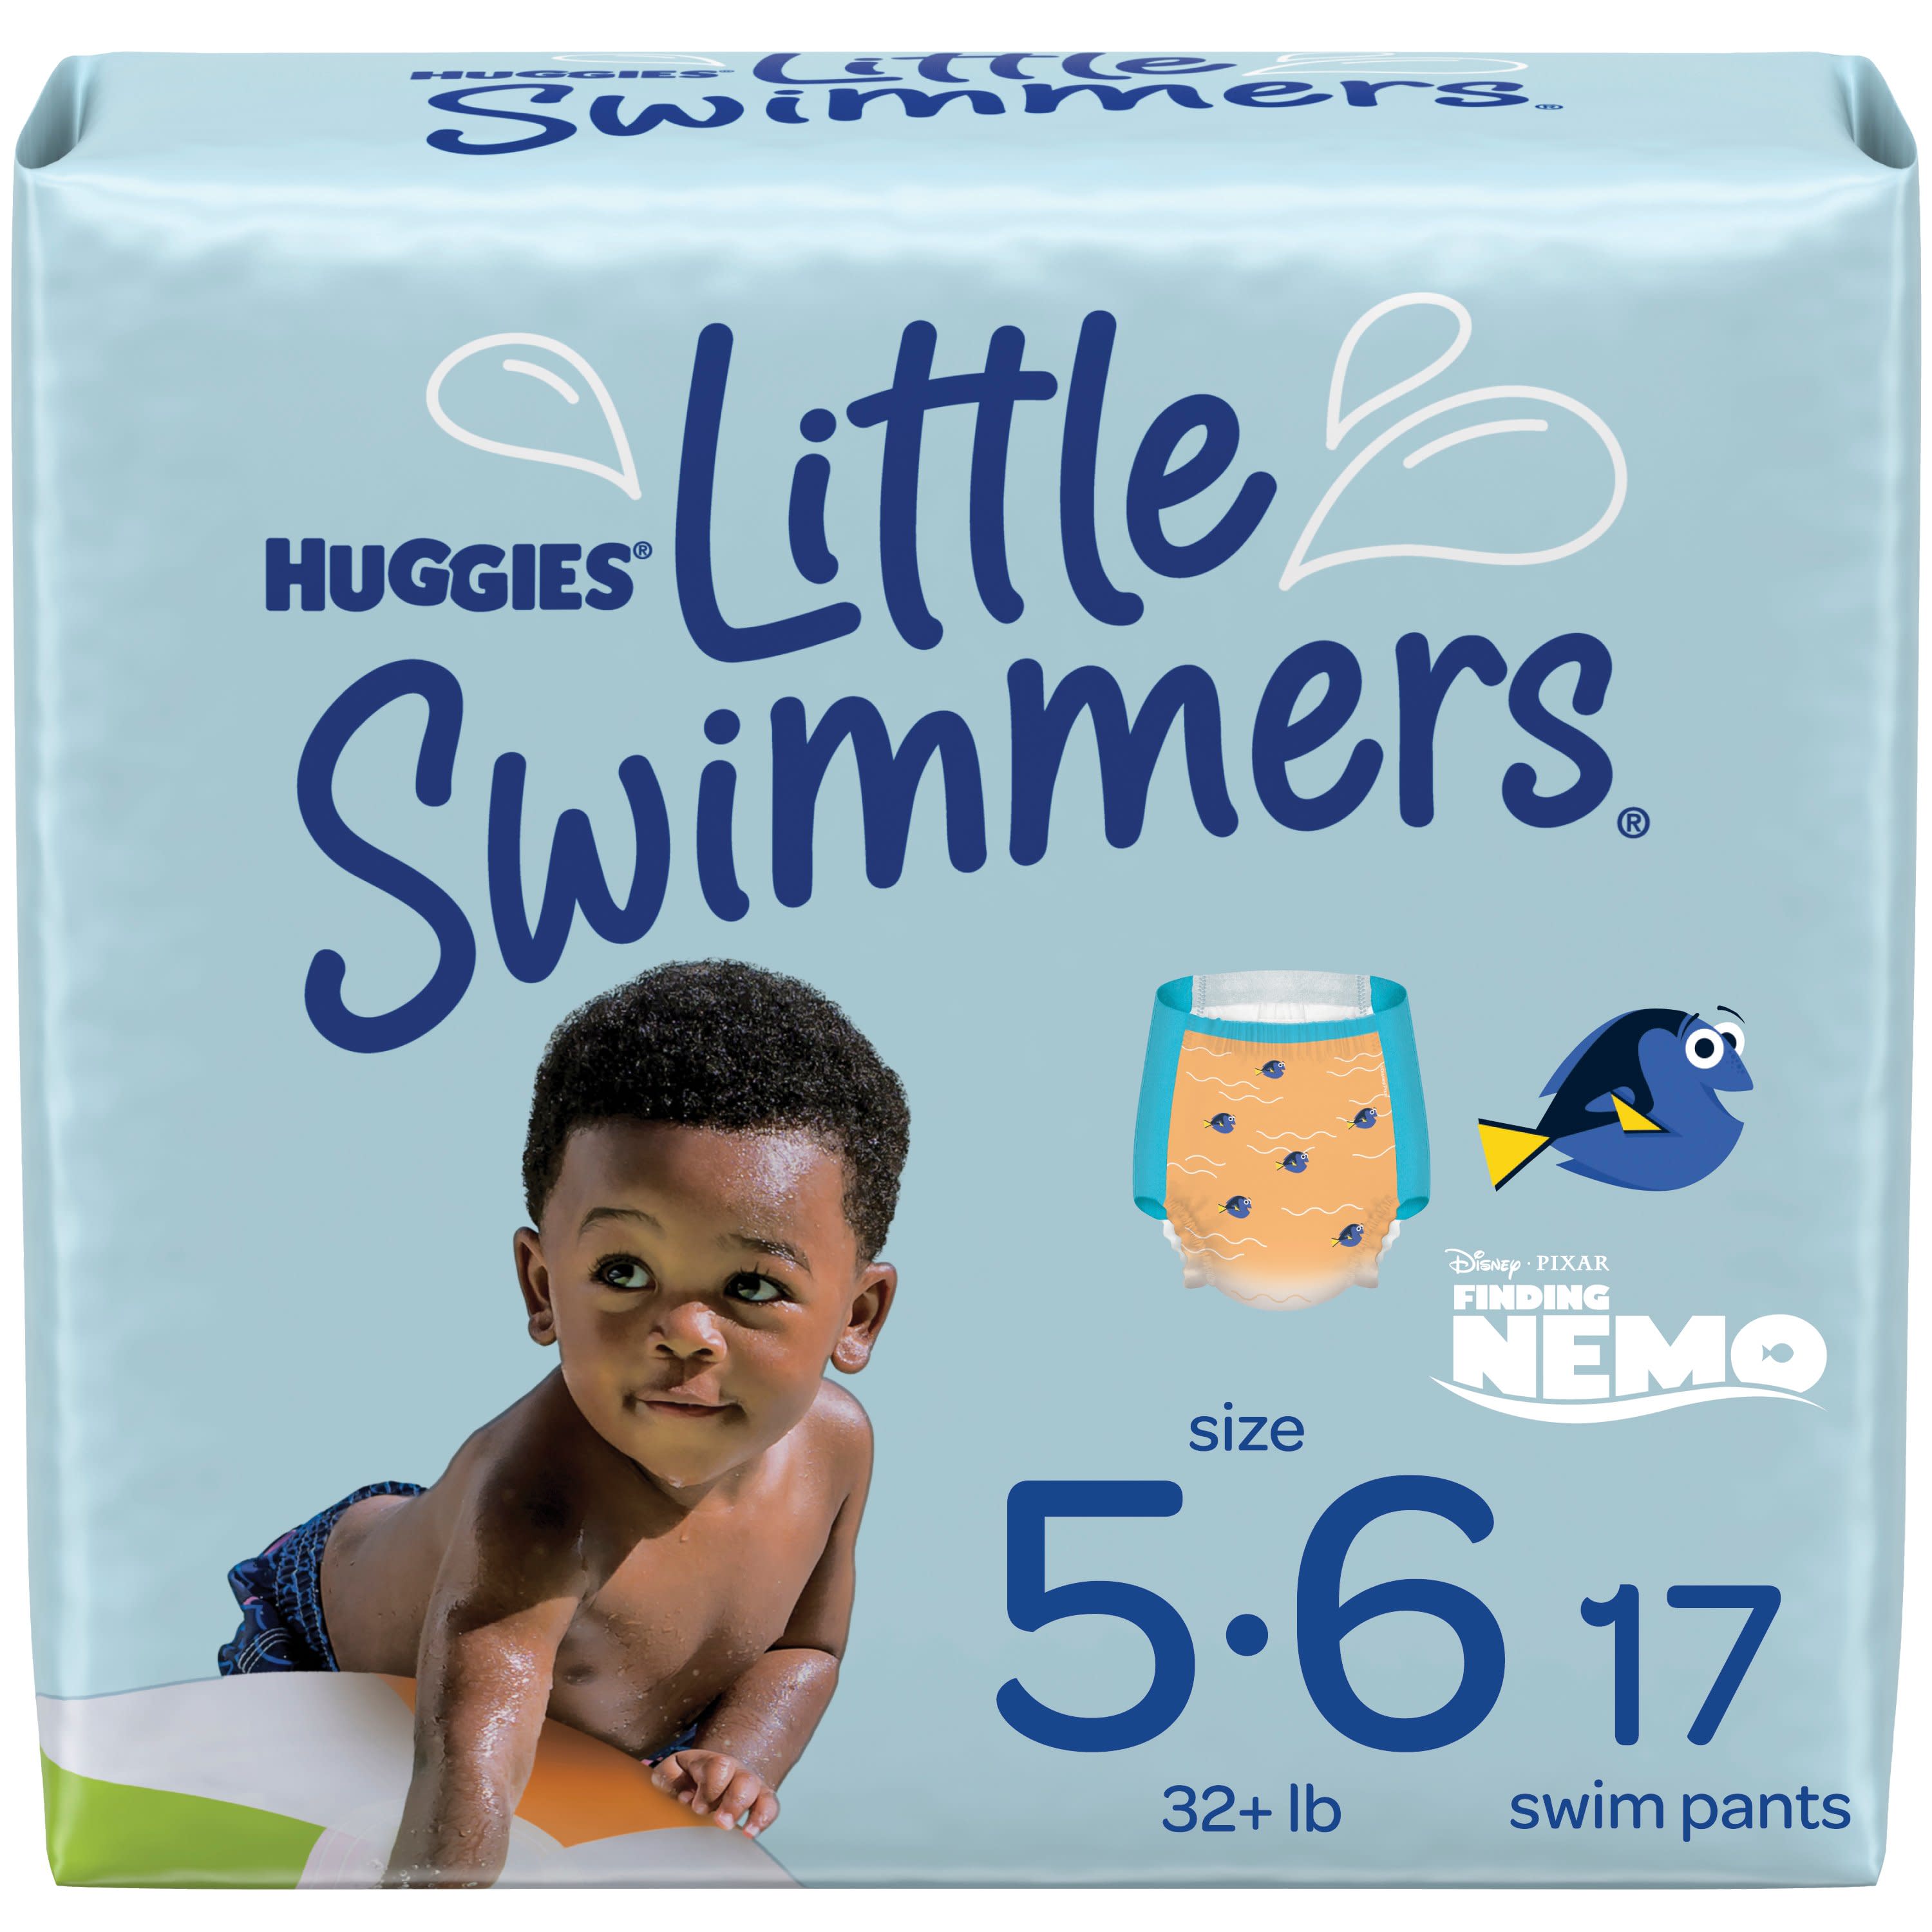 Huggies Little Swimmers Swim Diapers, Size 5-6 Large, 17 Ct - image 1 of 8